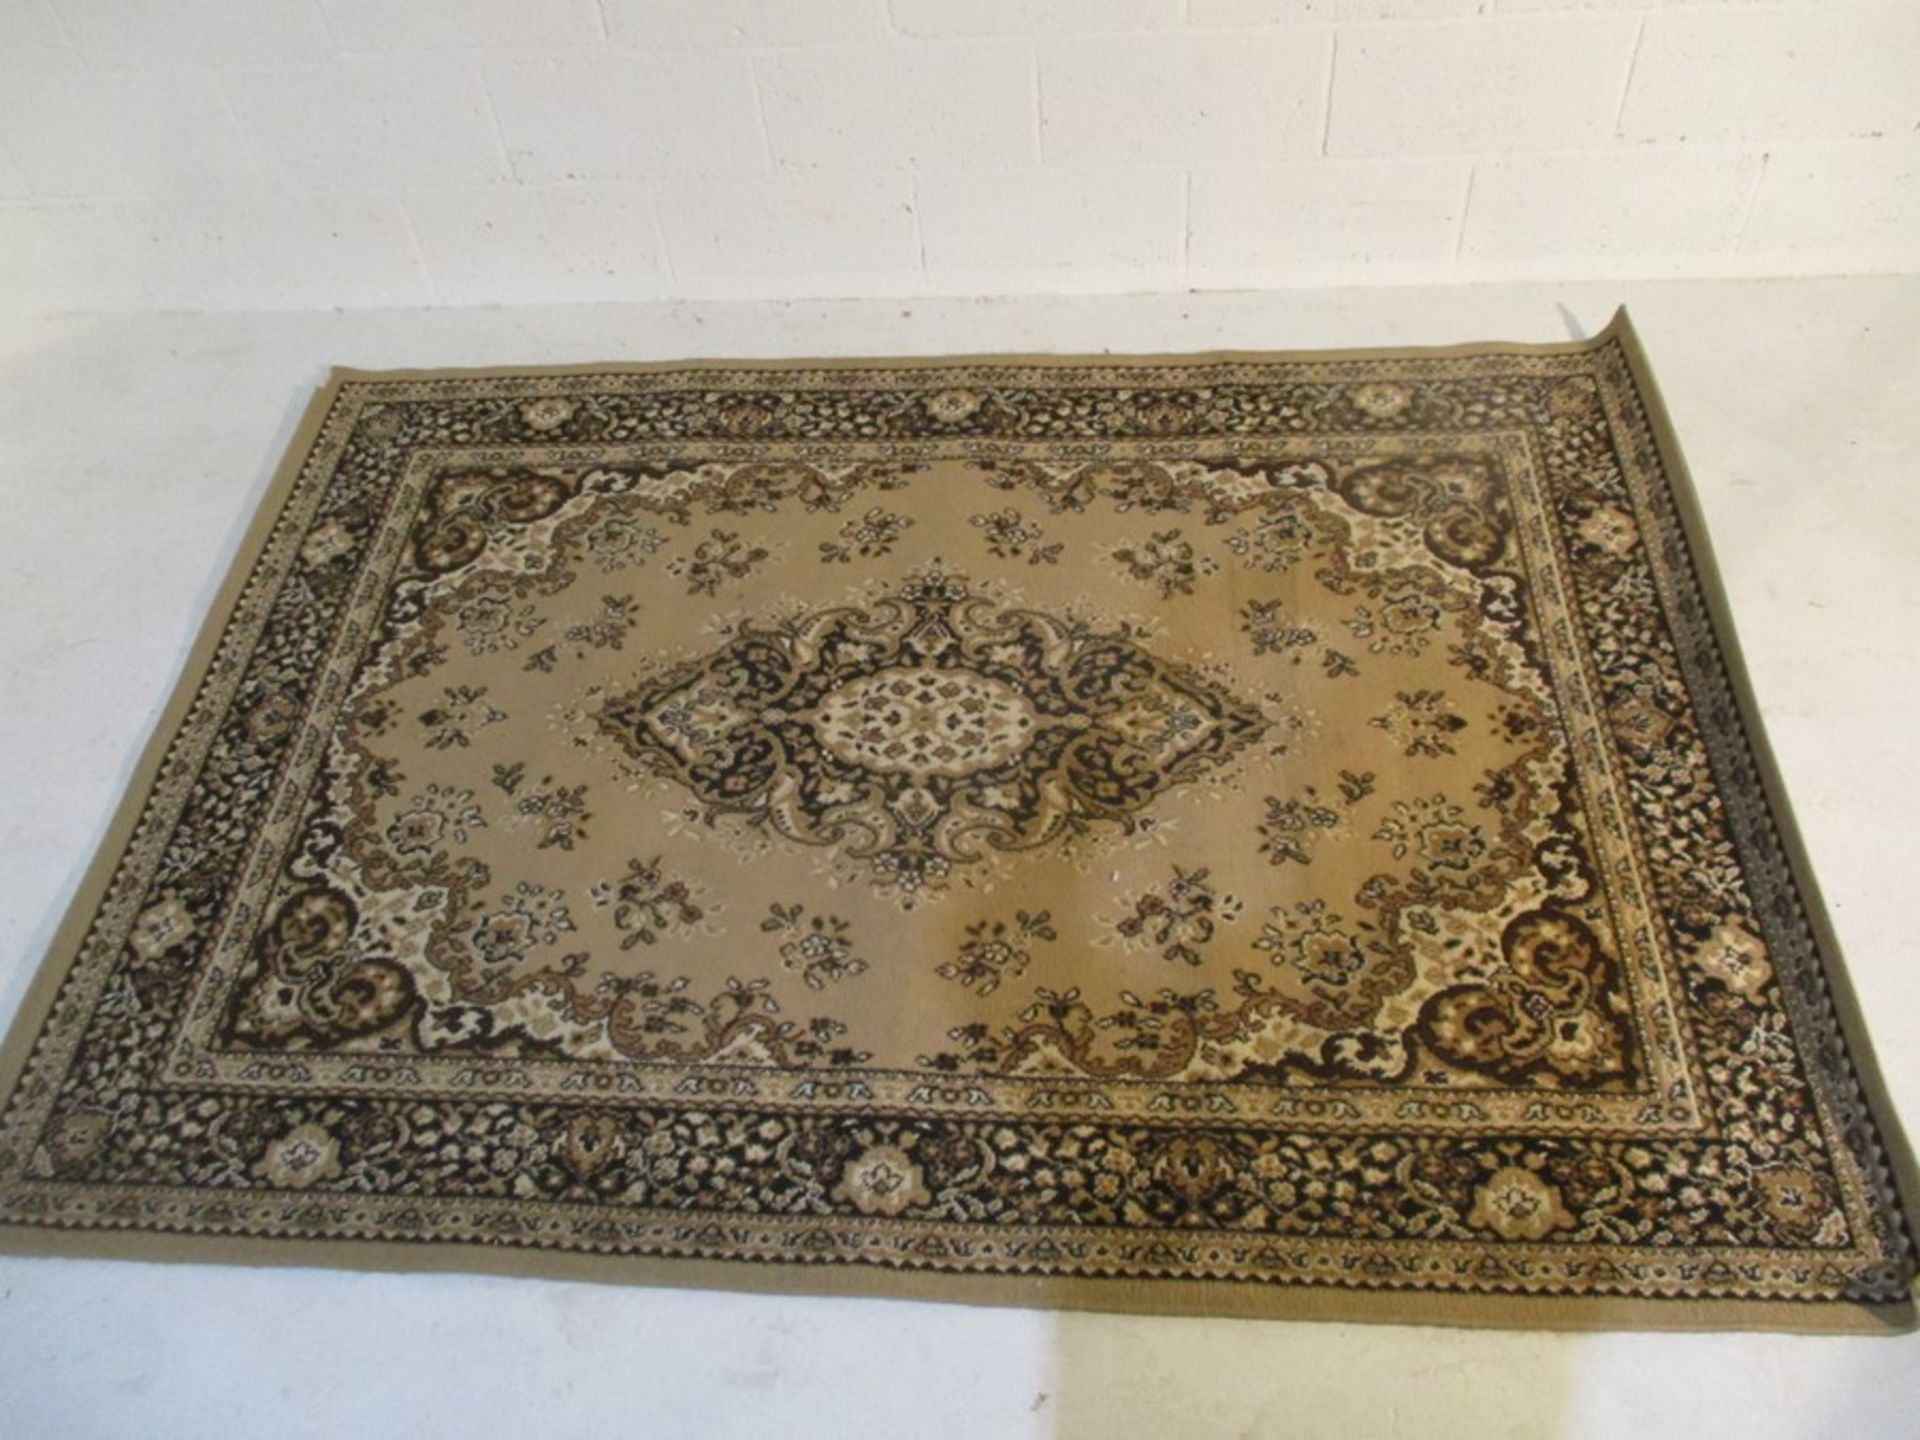 A brown patterned rug